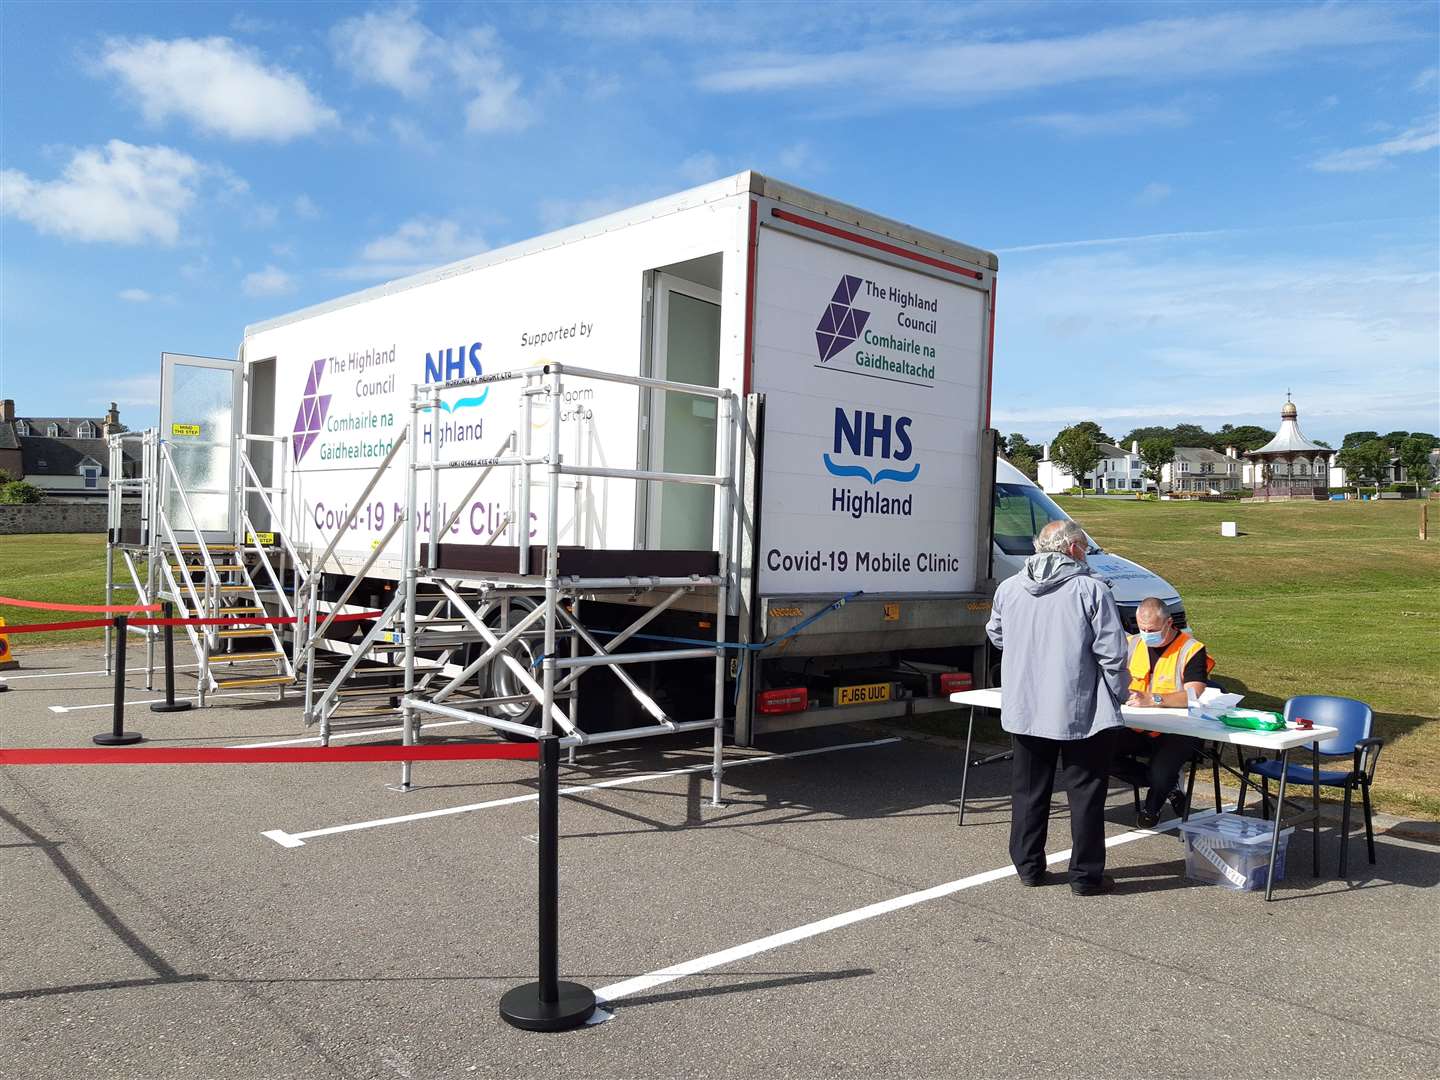 The mobile unit, Testalot will be at the B&M car park in Telford Retail Park, Inverness, this week.